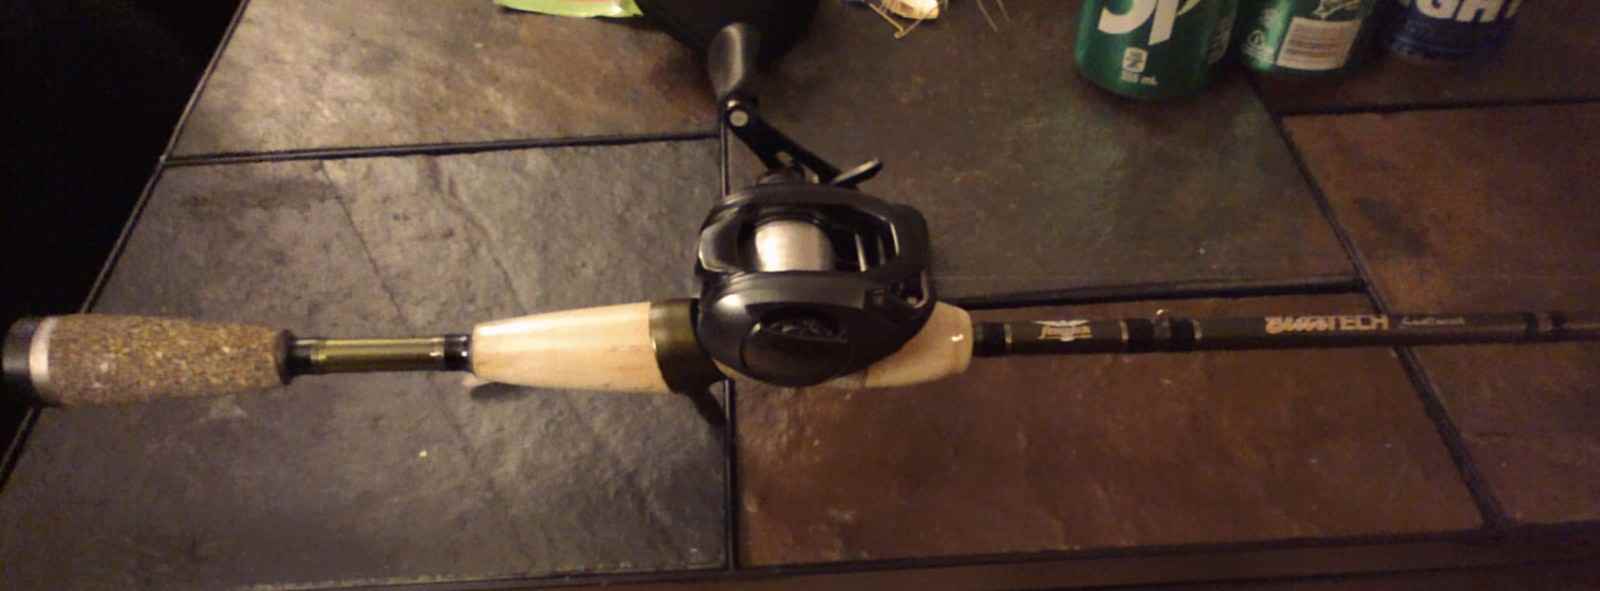 Found a new Fenwick Elite Tech Smallmouth - Fishing Rods, Reels, Line, and  Knots - Bass Fishing Forums